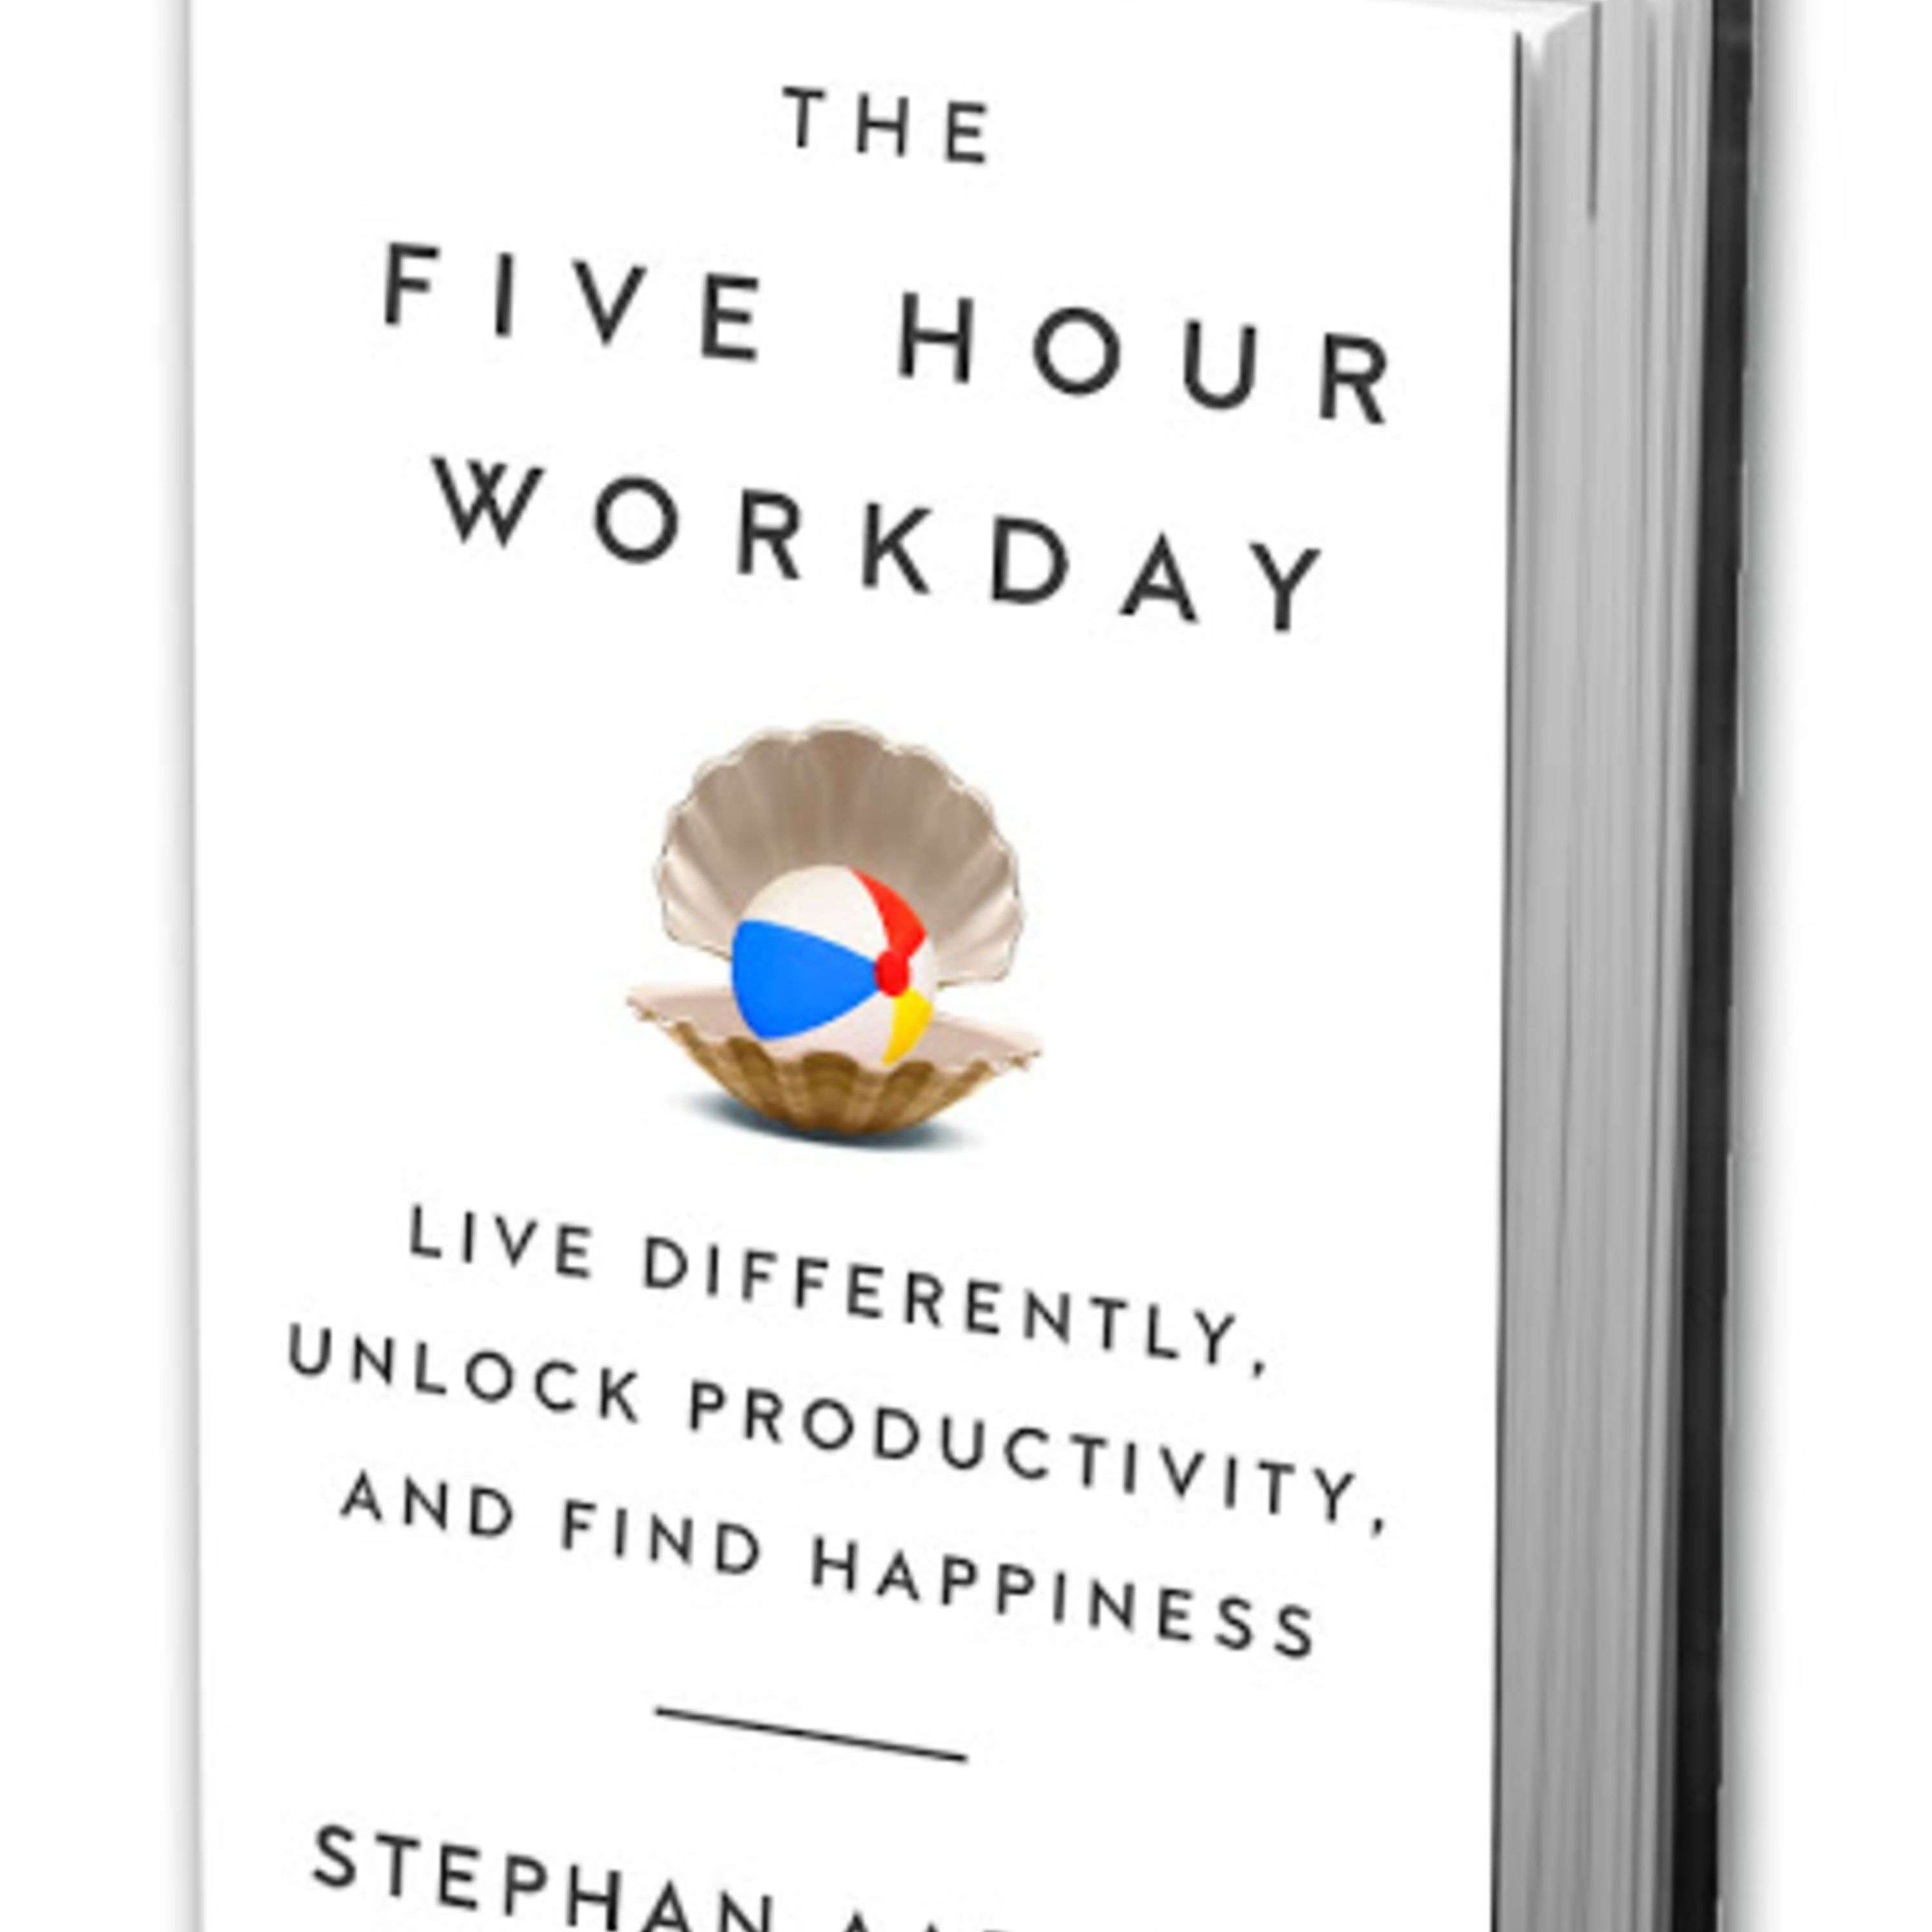 The 5-Hour Workday with Stephen Aarstol